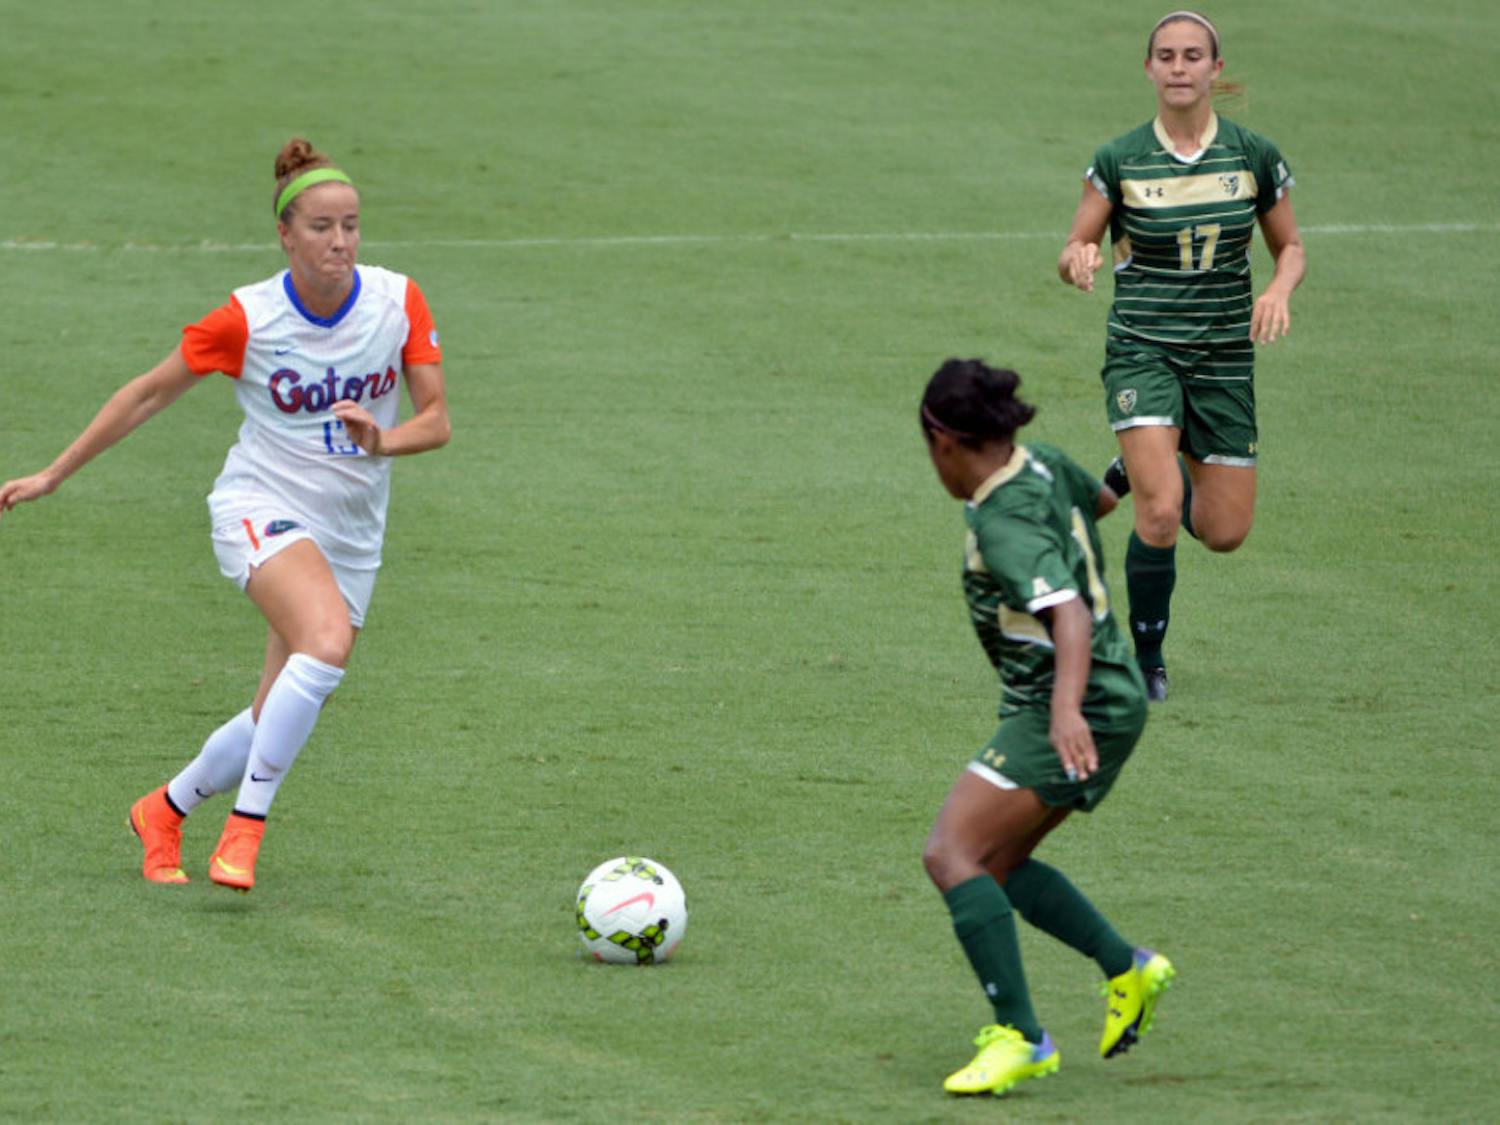 Annie Speese (13) dribbles the ball down the field during Florida's 2-0 win against South Florida on Sunday at Donald R. Dizney Stadium. Speese scored both of UF's goals.